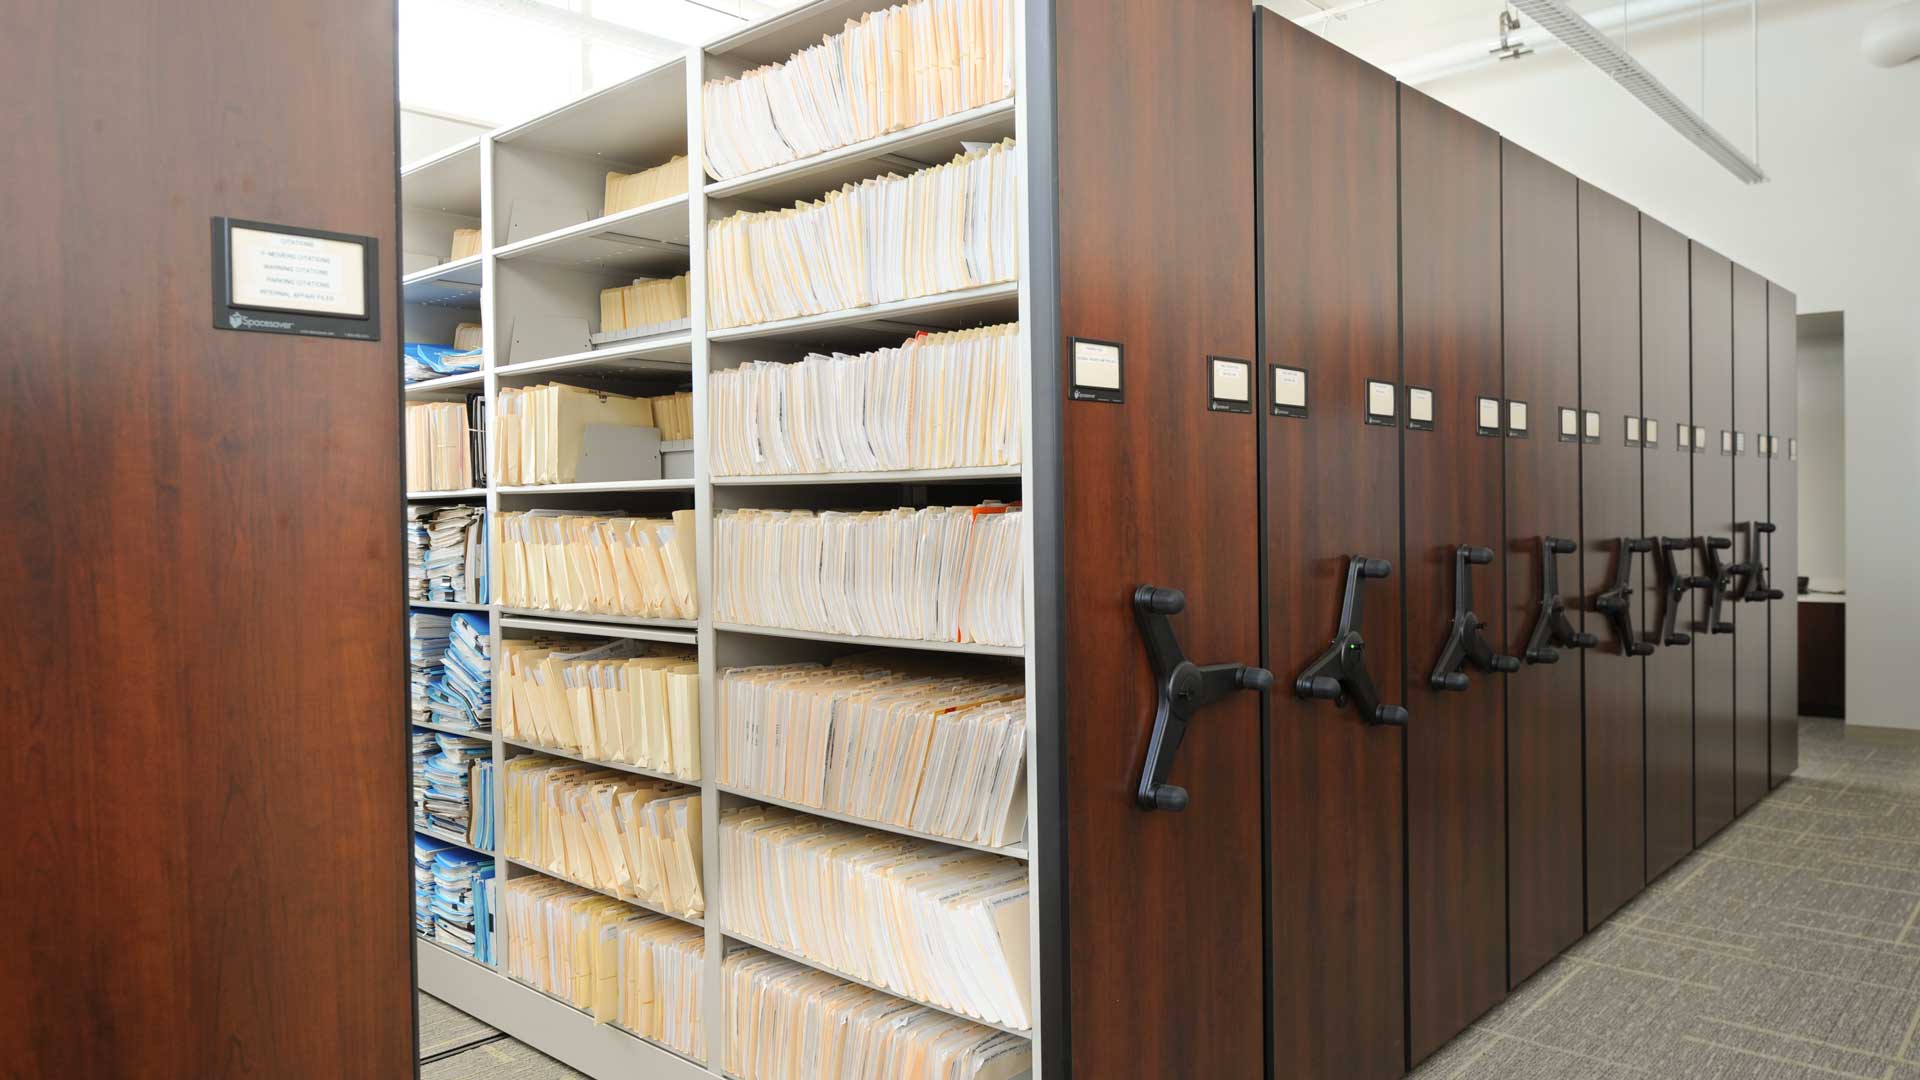 file compactor shelving featured